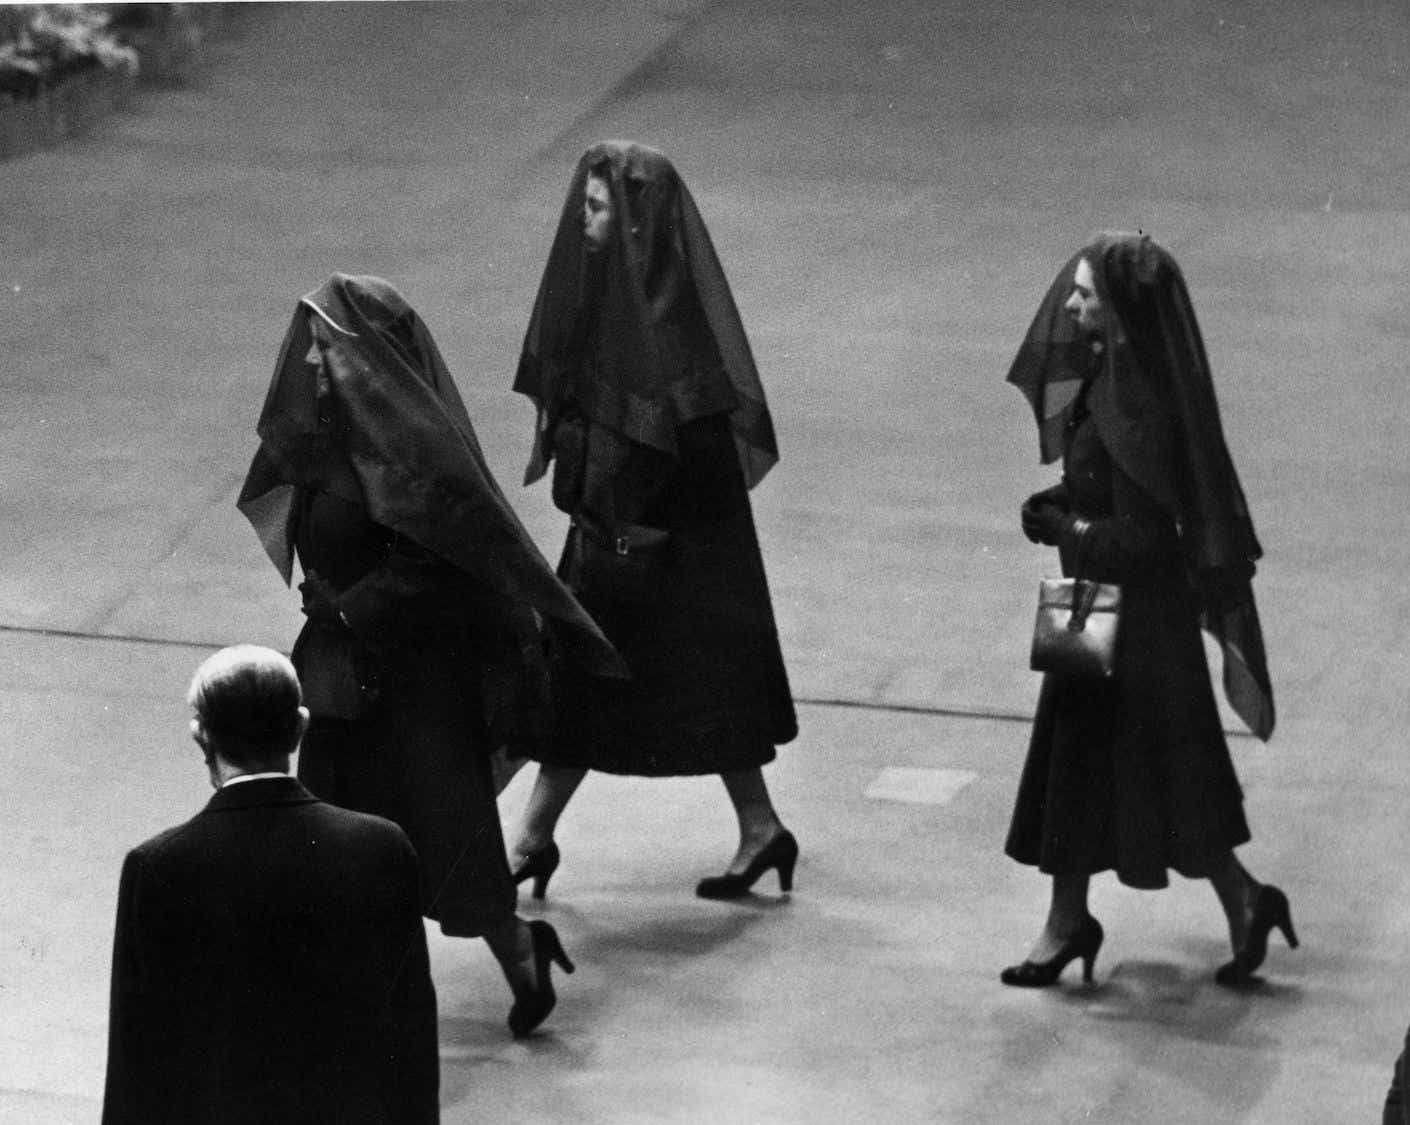 Left to right: Queen Elizabeth the Queen Mother, Queen Elizabeth II and Princess Margaret attend the arrival of the coffin of King George VI at Westminster Hall, London in 1952. ALl three are dressed in black dresses and veils.